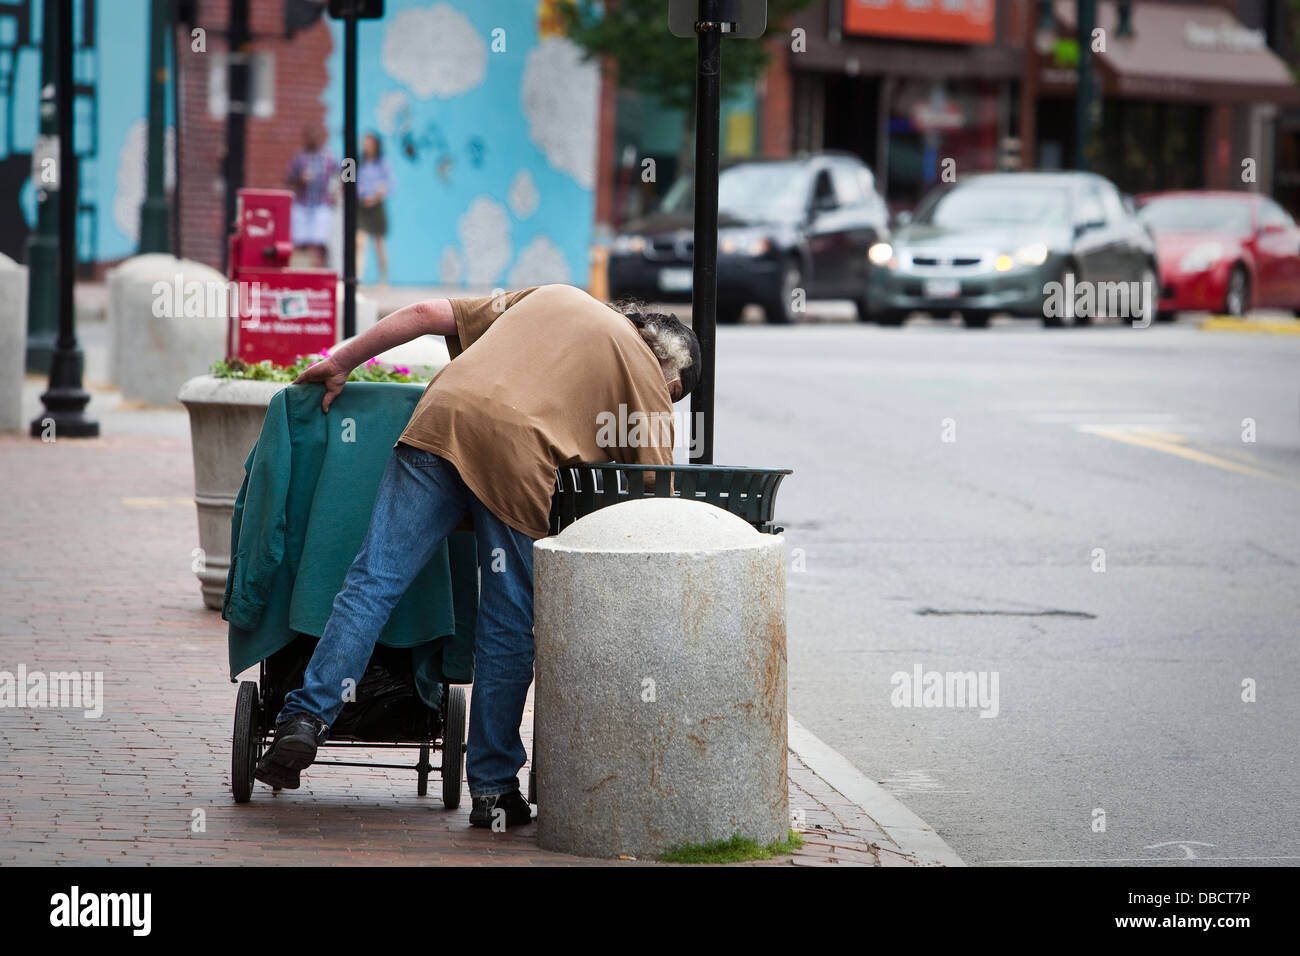 https://c8.alamy.com/comp/DBCT7P/a-man-searches-into-garbage-can-on-congress-street-in-portland-maine-DBCT7P.jpg